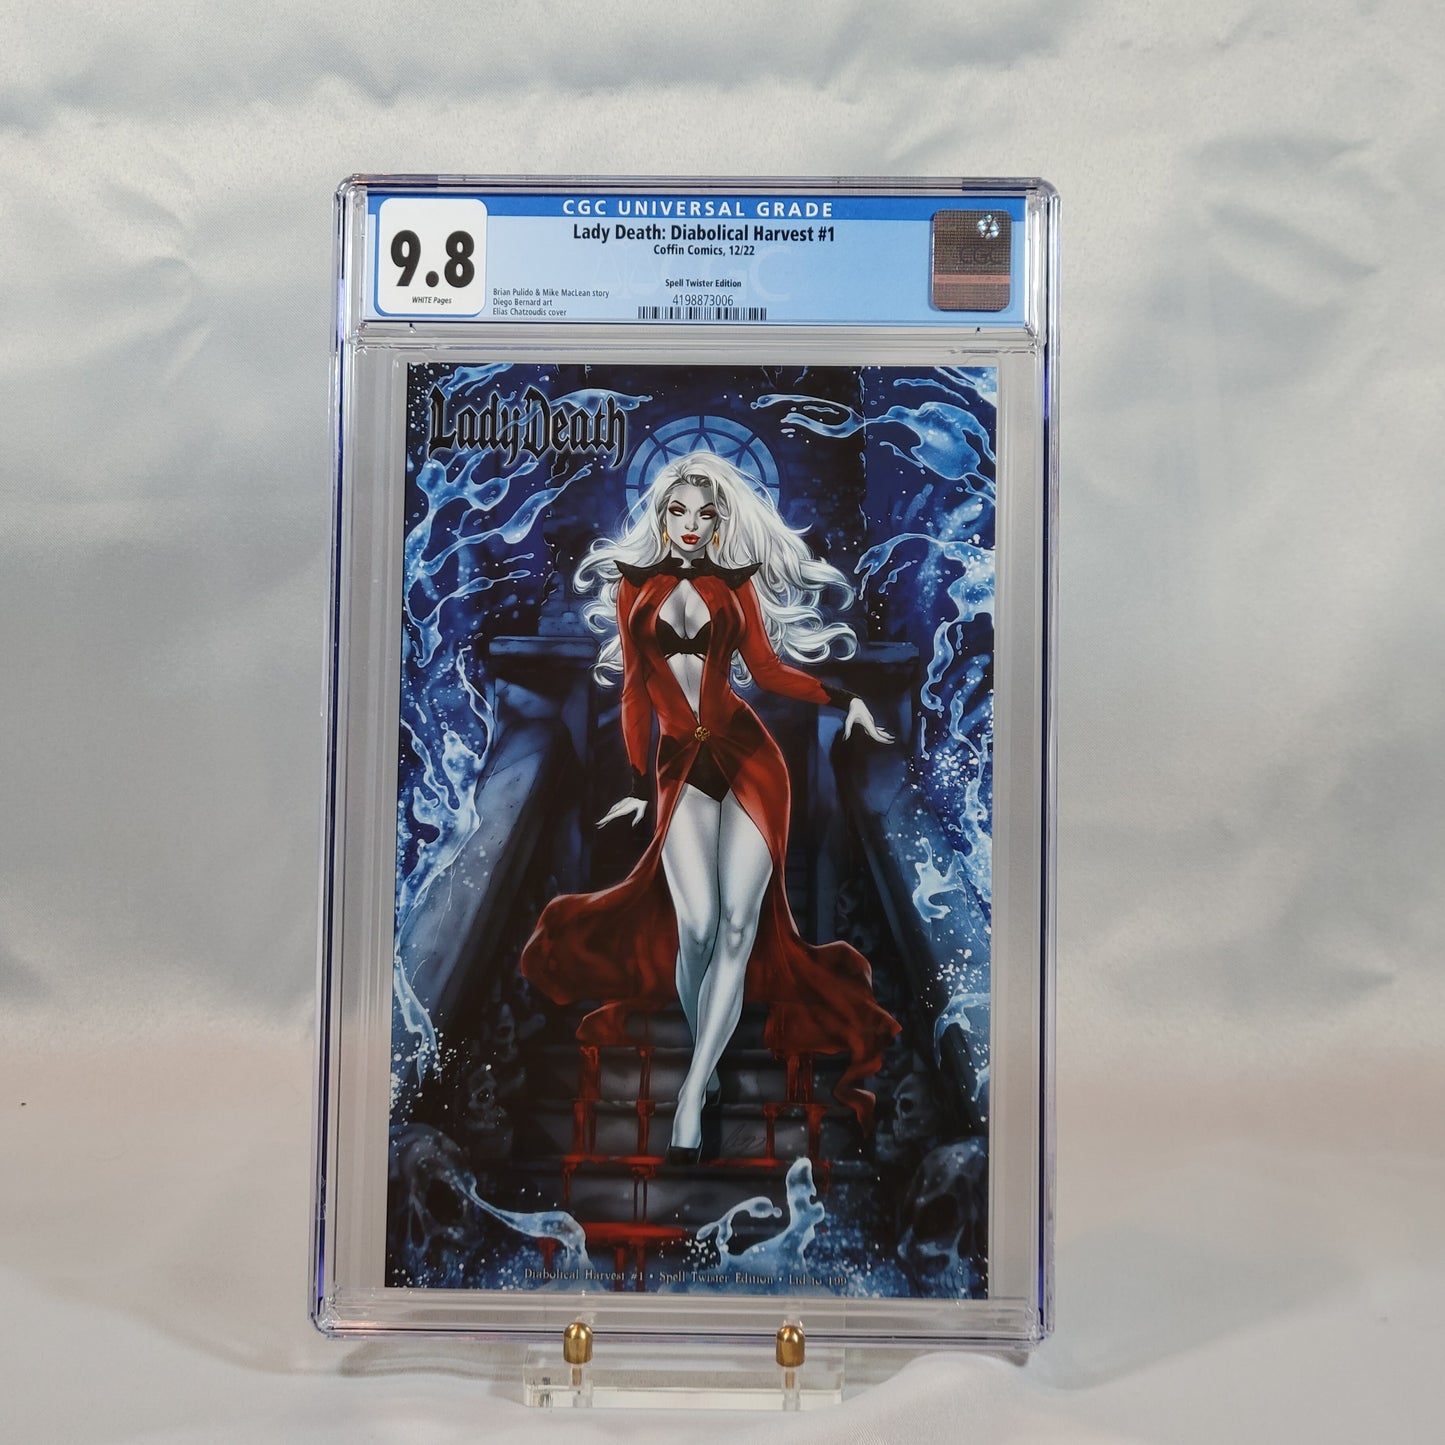 Lady Death: Diabolical Harvest "Spell Twister" Collection